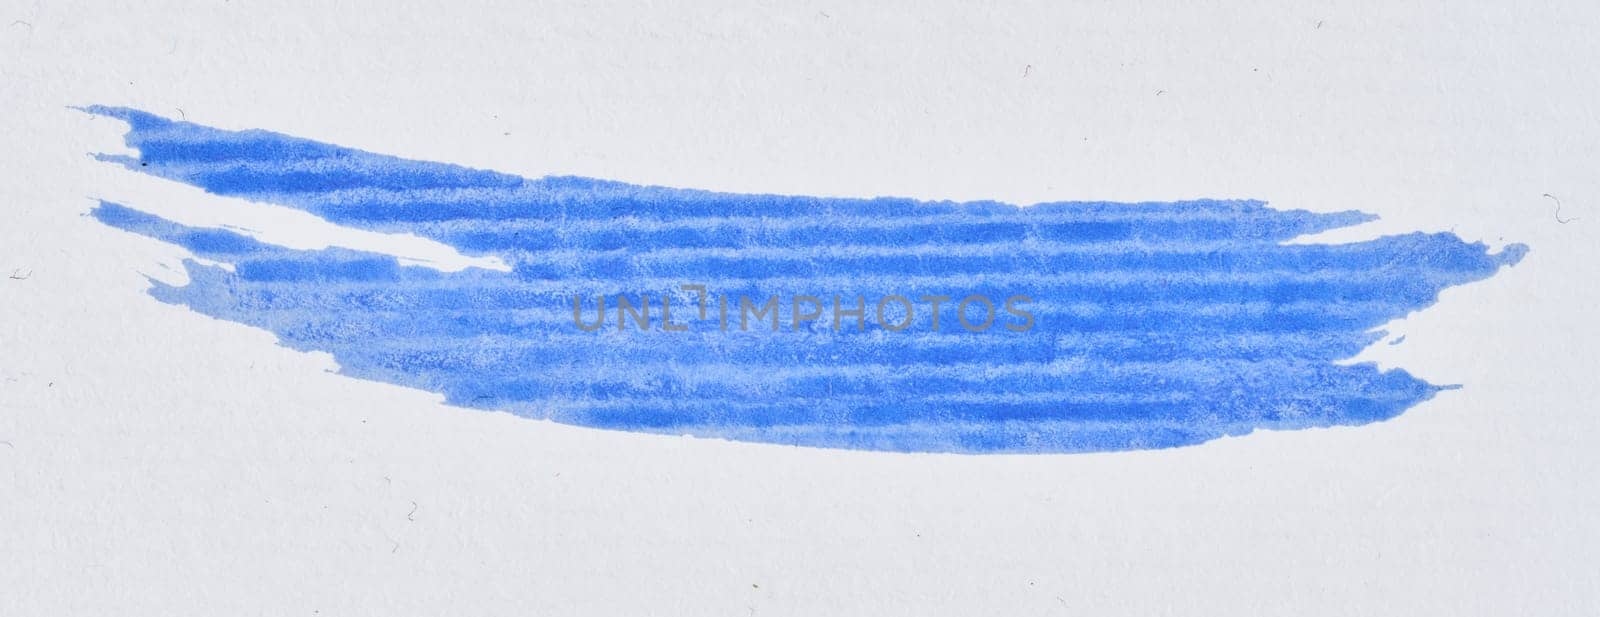 Watercolor brush stroke of blue paint, on a white background